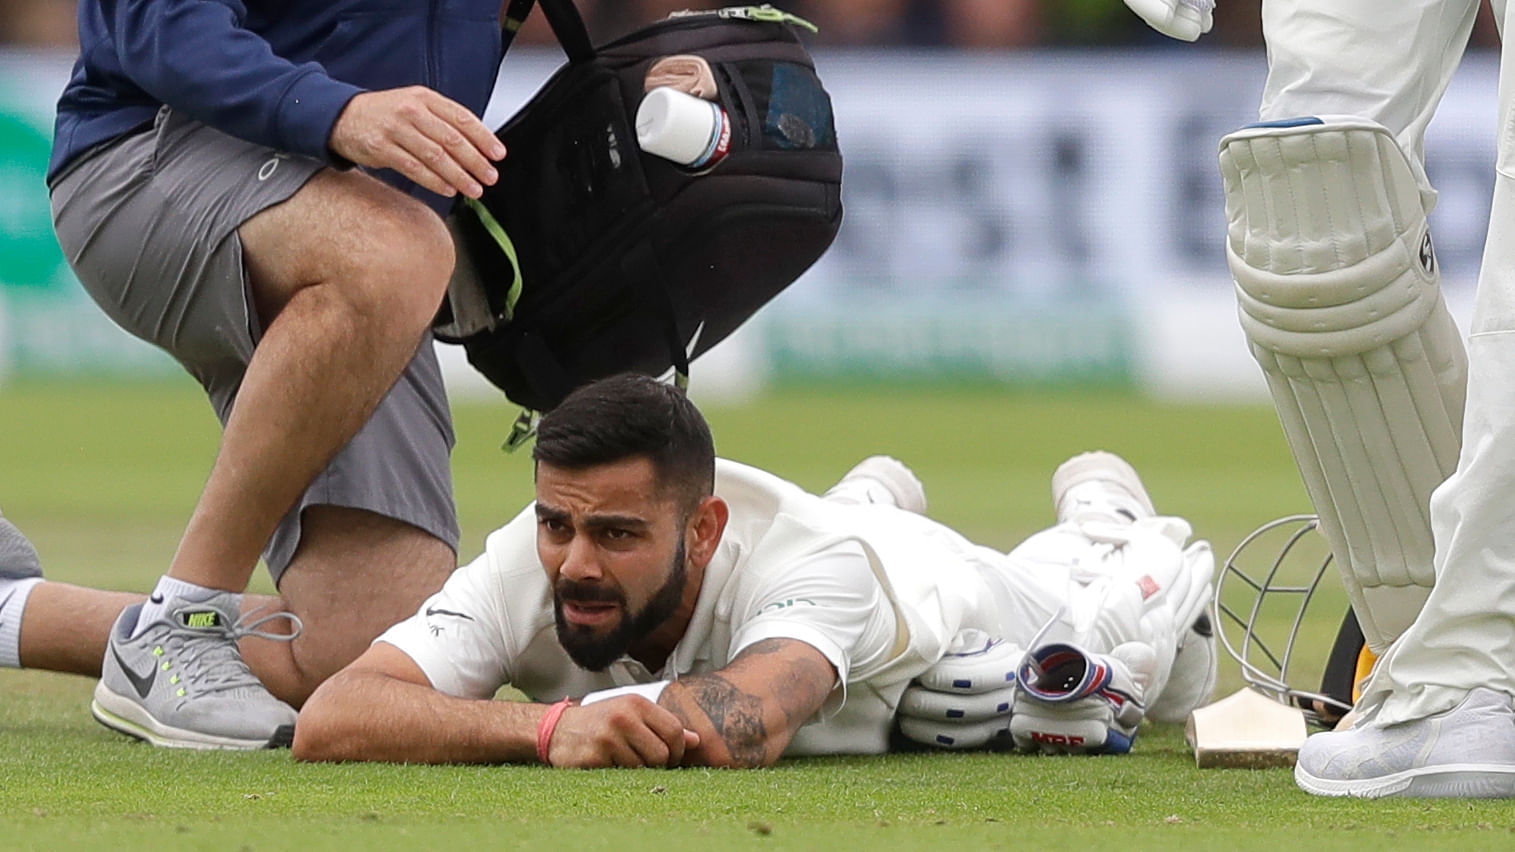 The Indian skipper aggravated a back strain during the match at Lord’s and missed a part of England’s batting.